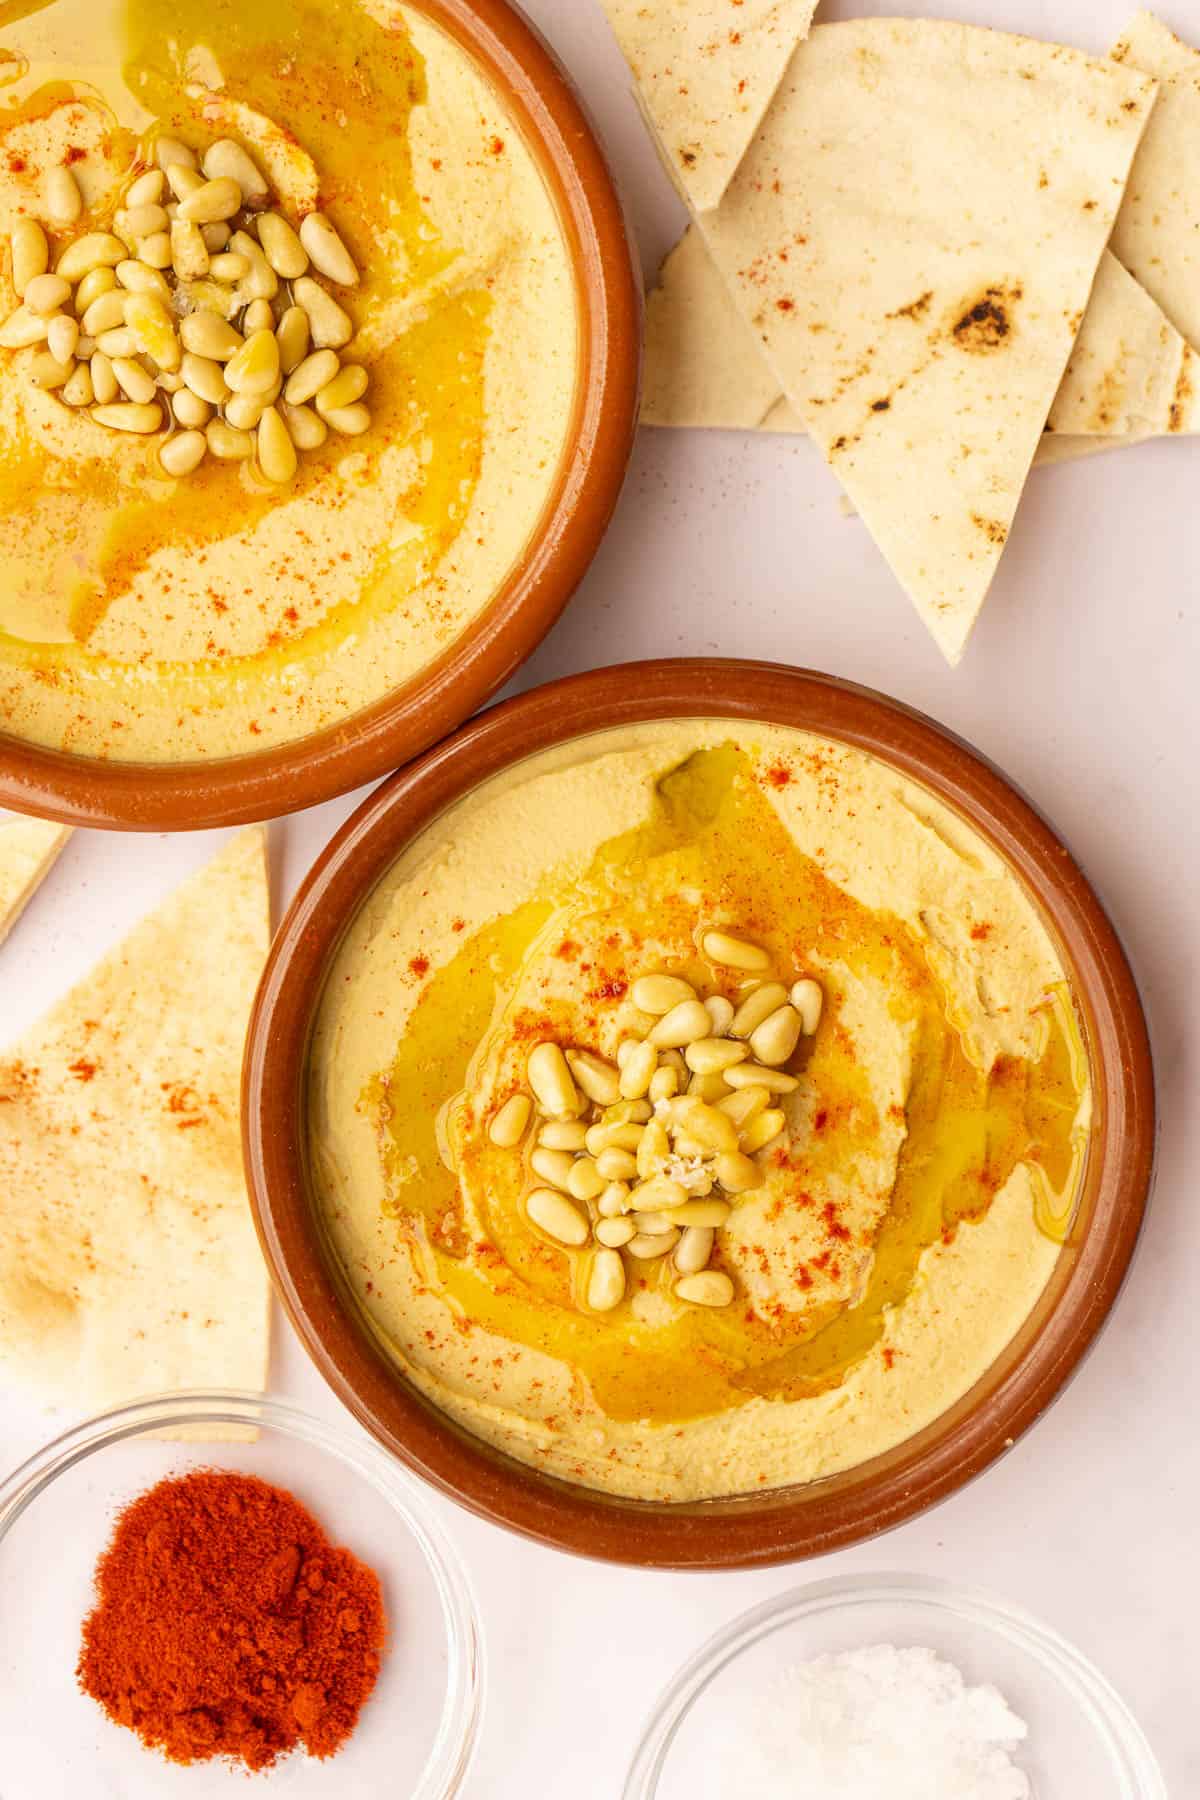 Two clay bowls of hummus topped with pine nuts, olive oil, and paprika, plus pita bread.